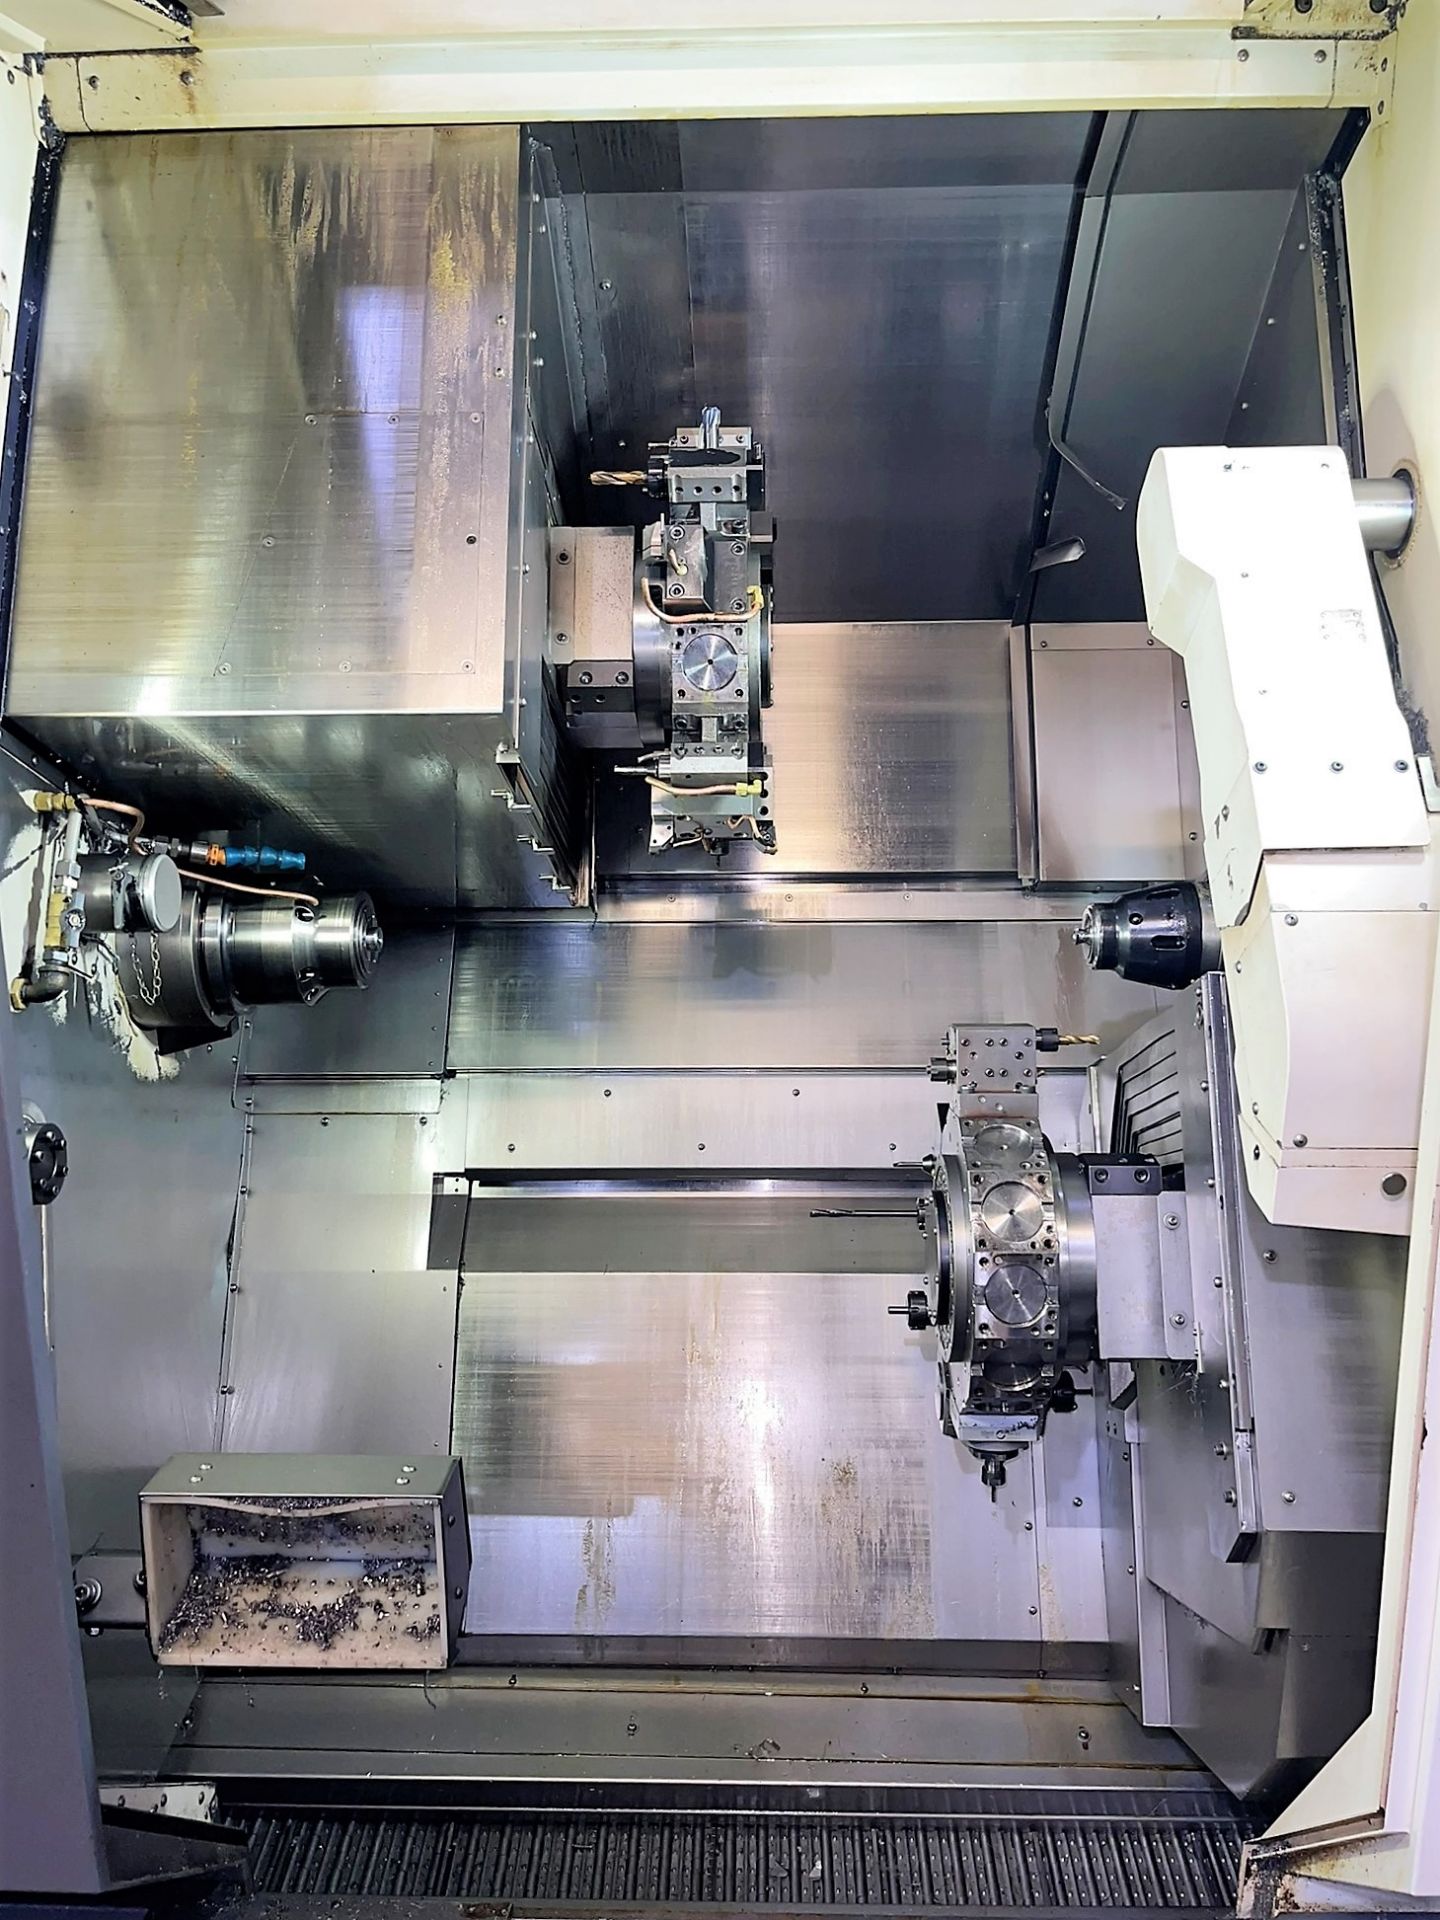 2012 Nakamura Super-Mill WY-250L 10-Axis CNC Turning/Milling Center, S/N N280204 - Image 4 of 22